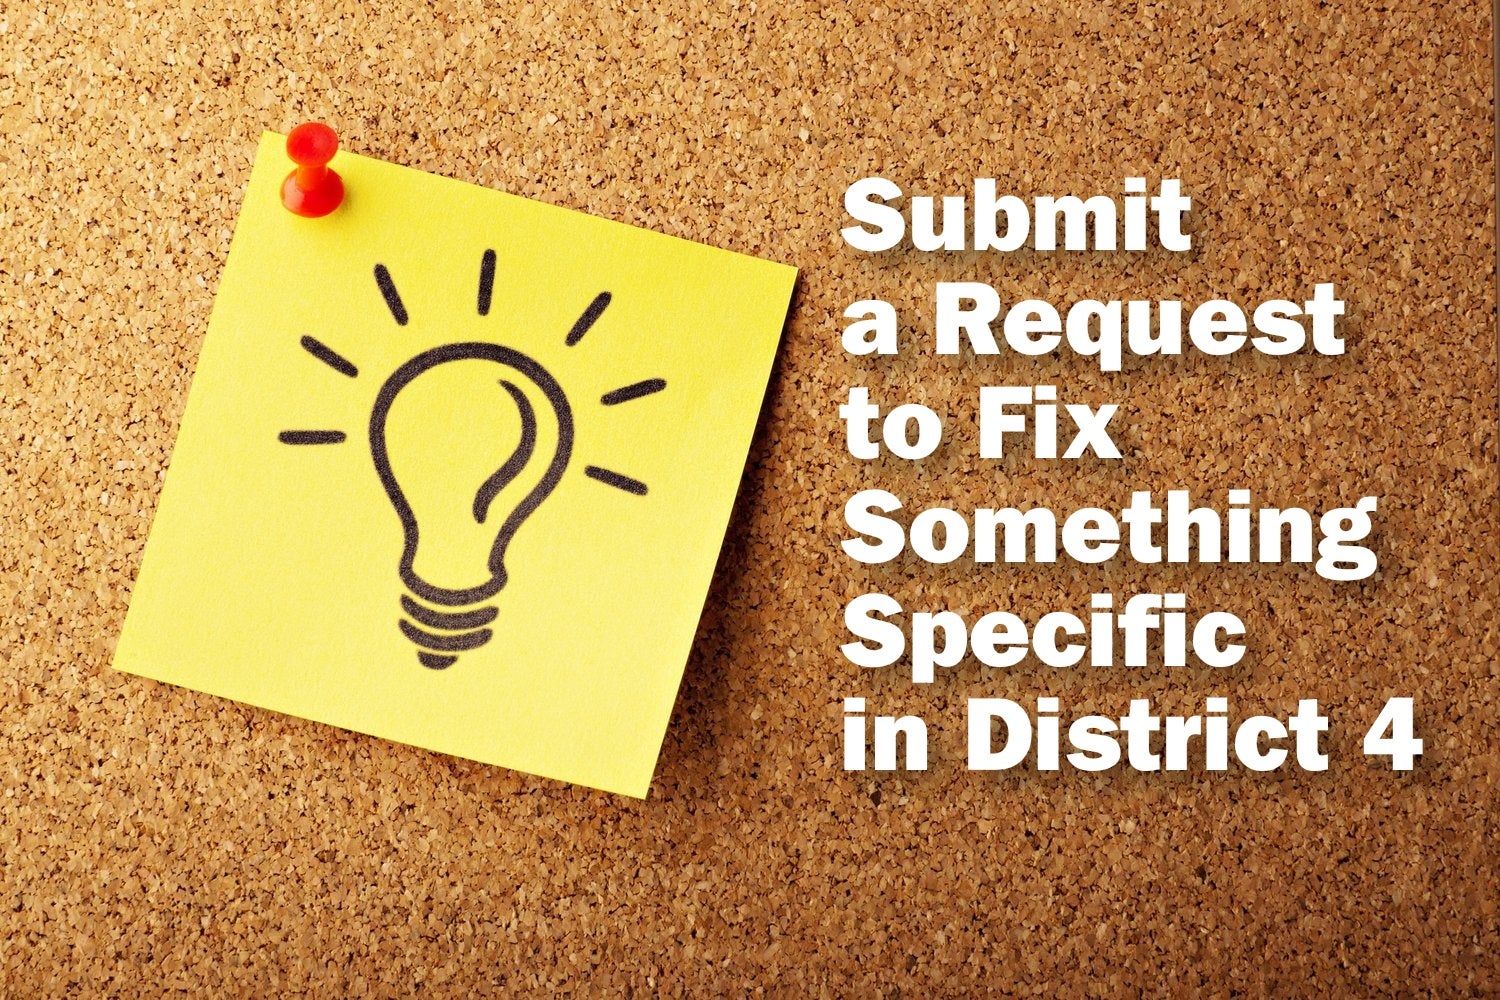 Submit a request to fix something specific in District 4